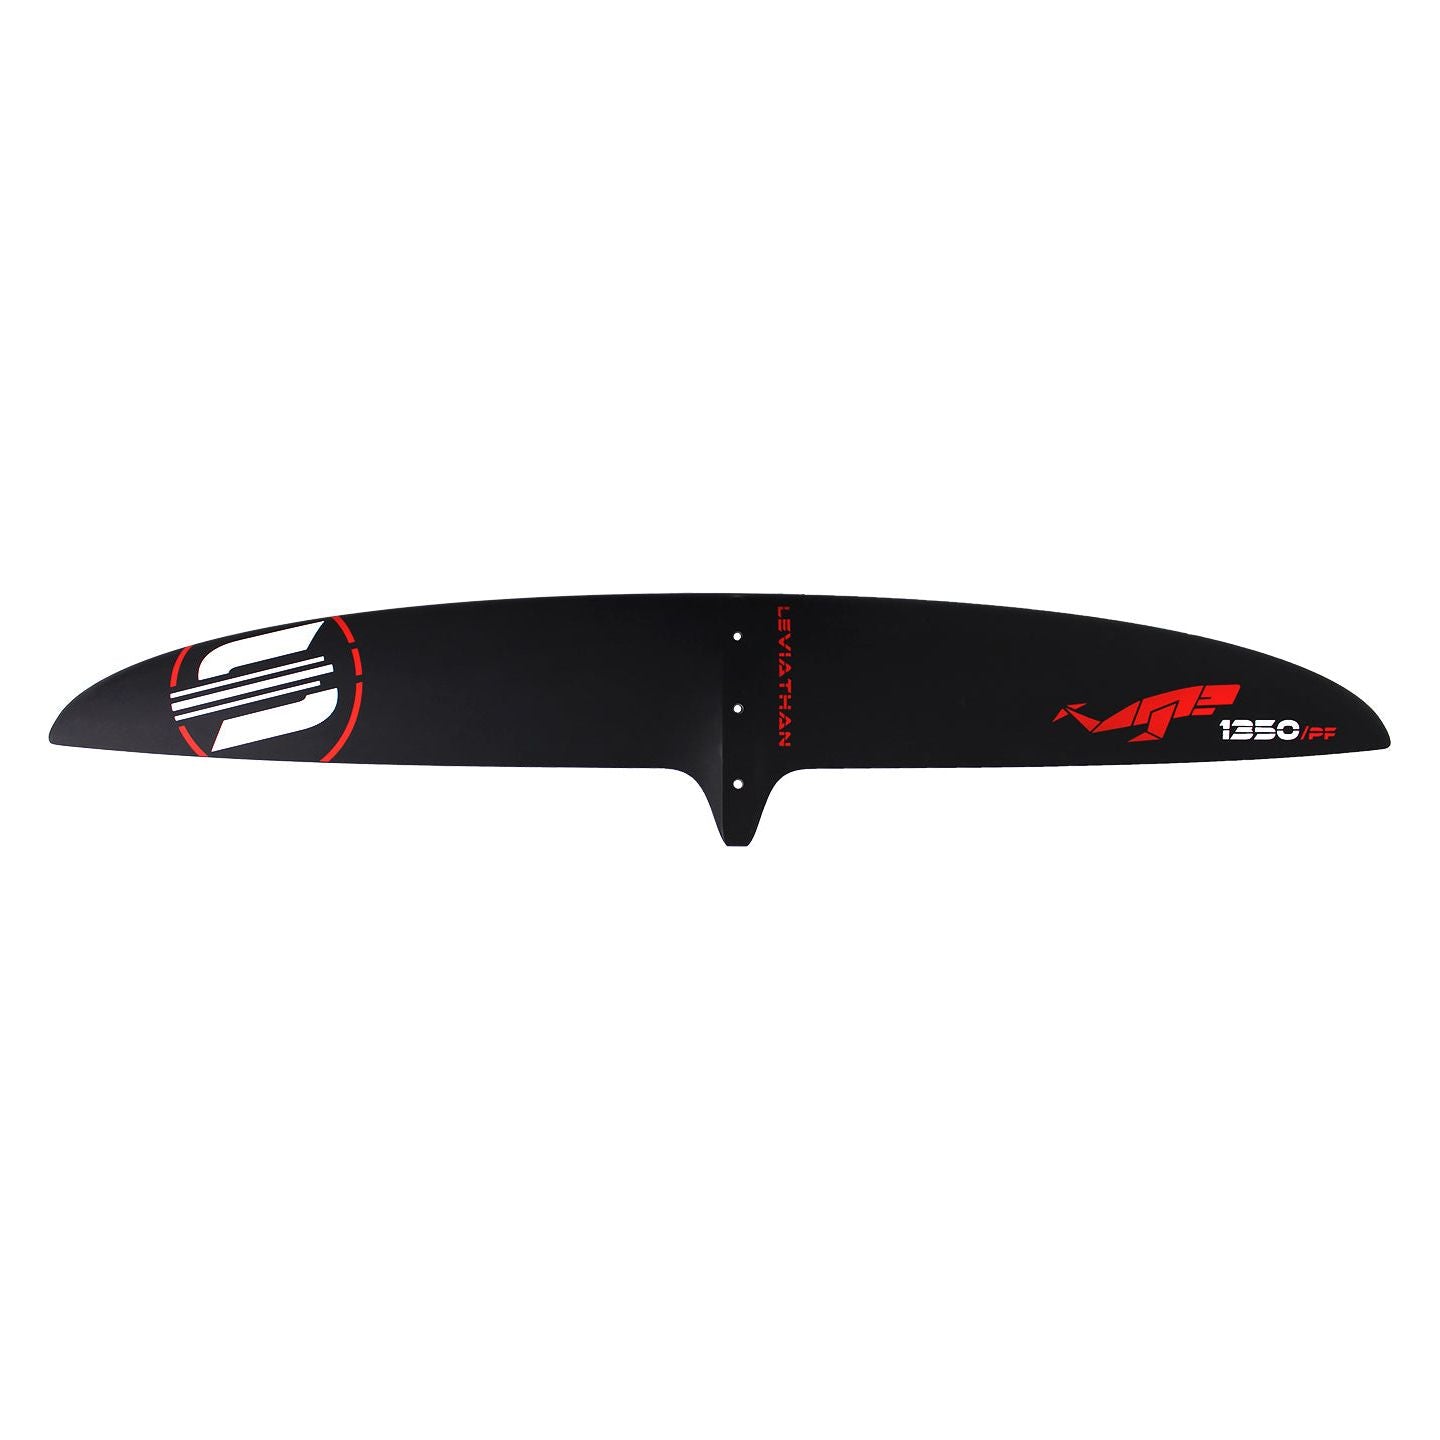 Sabfoil Leviathan 1350 Pro Finish | T8 Hydrofoil Front Wing